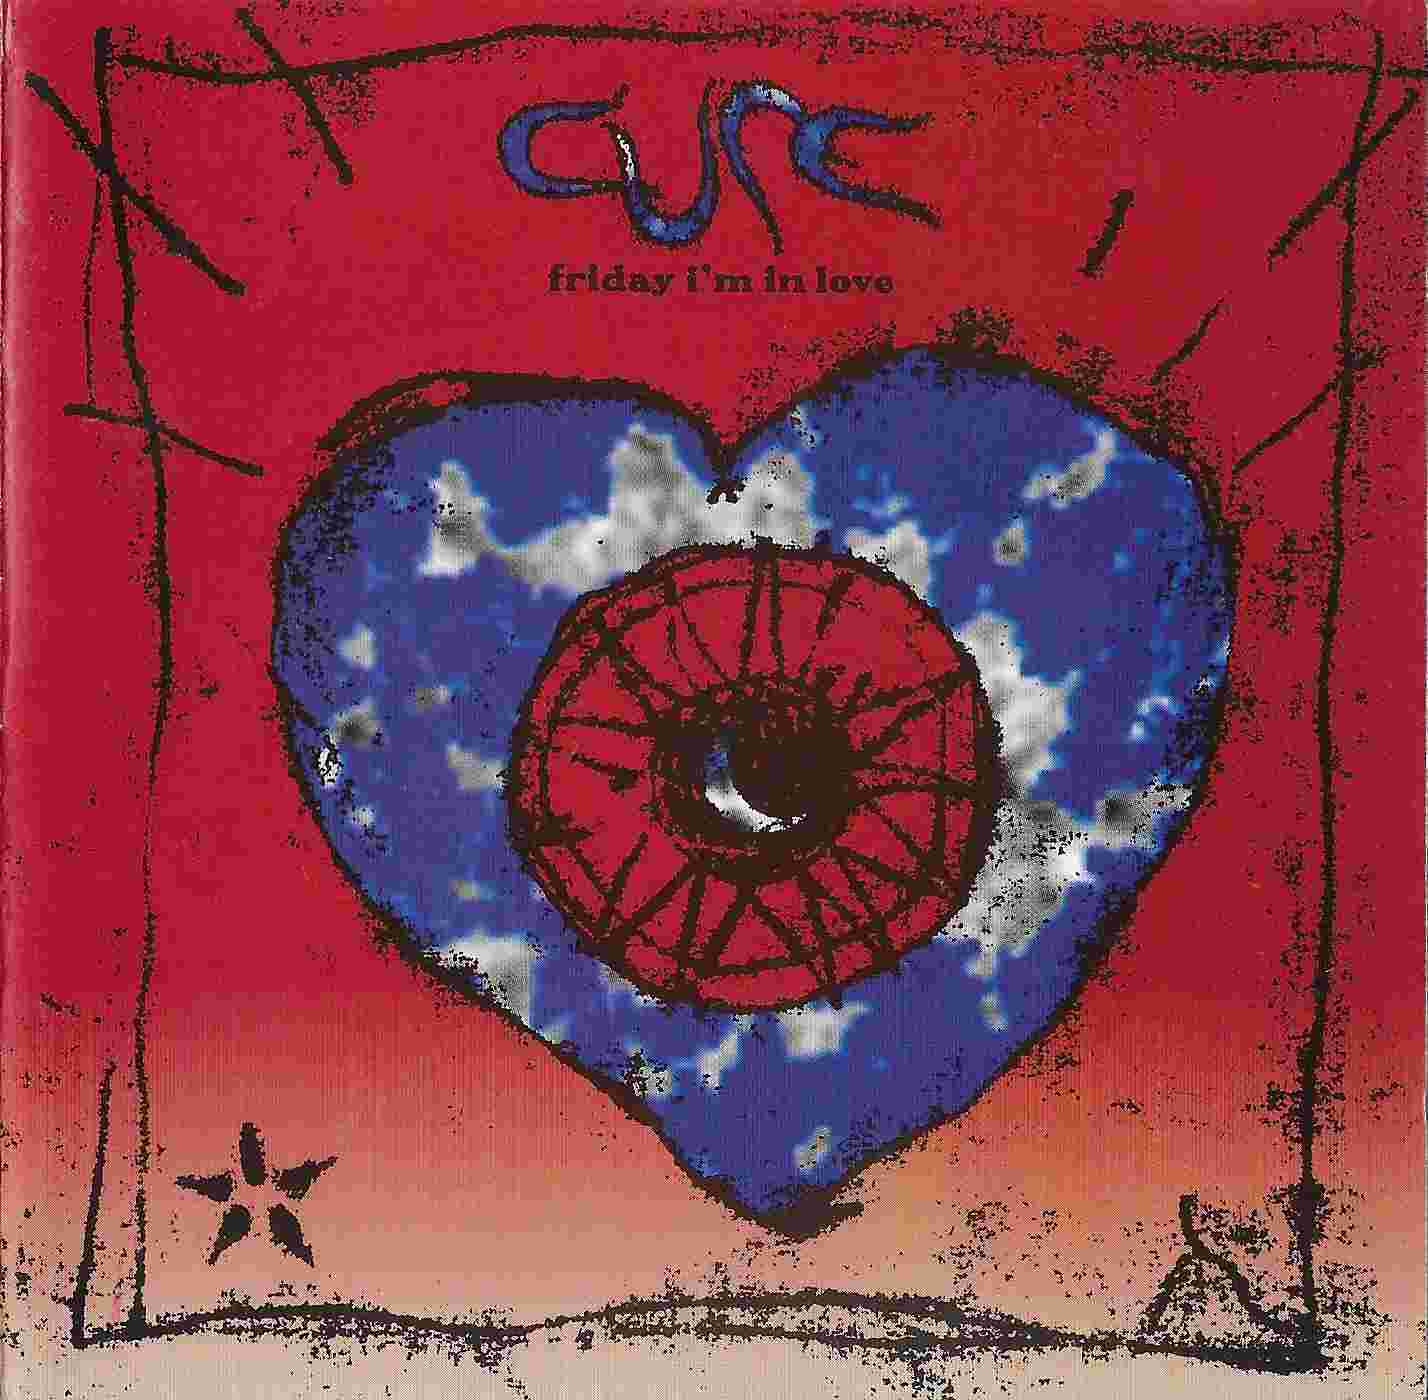 Picture of FIC CD 42 Friday I'm in love by artist The Cure  